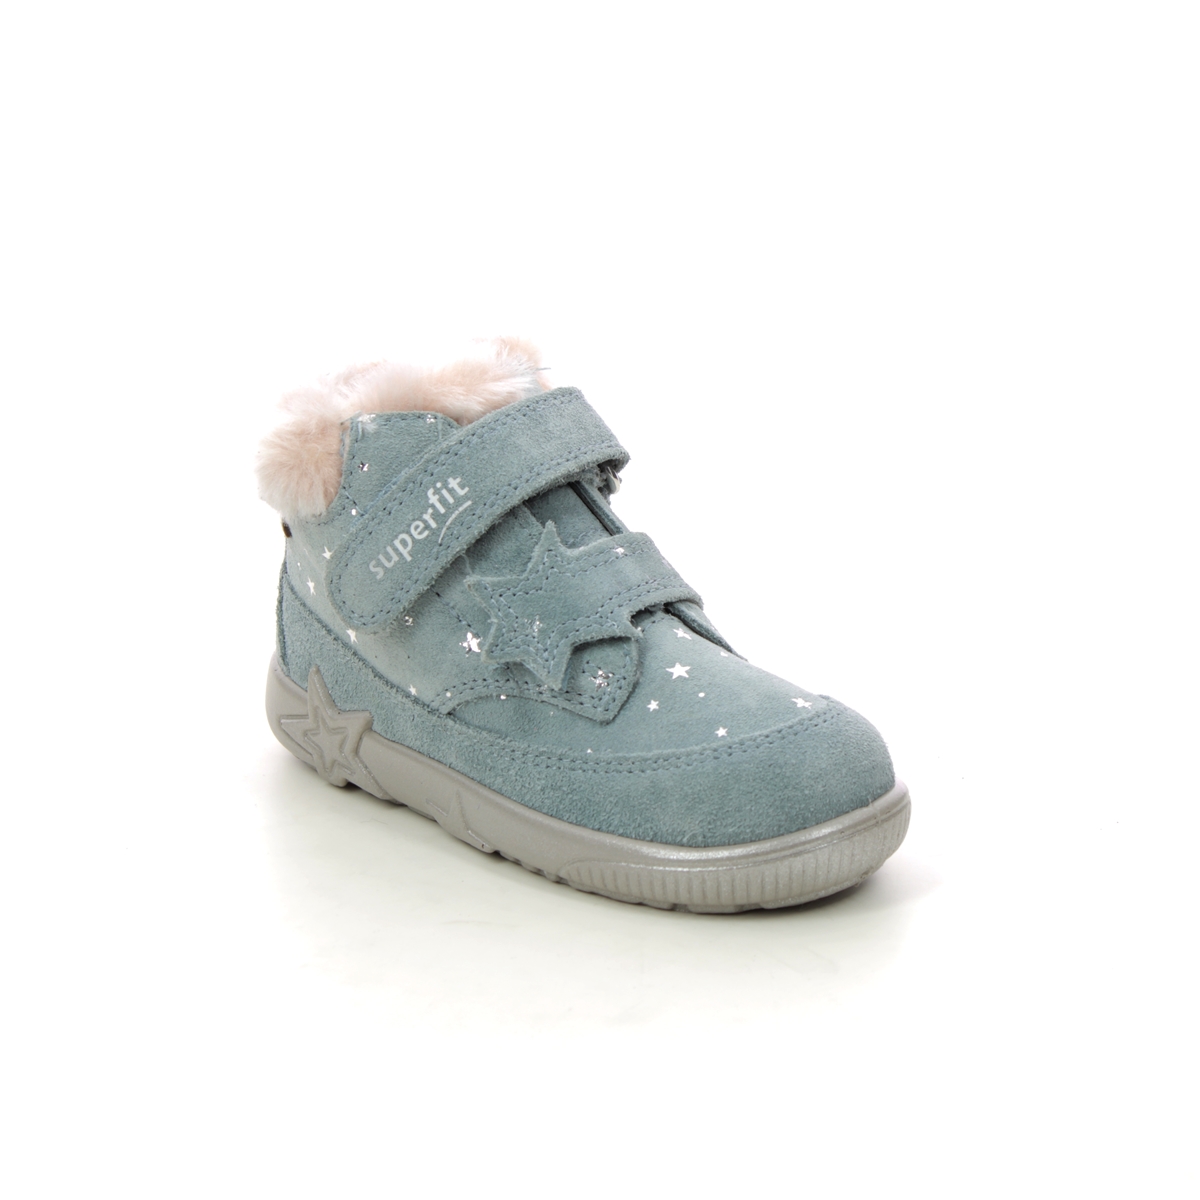 Superfit Starlight Gtx Light blue Kids Toddler Girls Boots 1006445-7500 in a Plain Leather in Size 26